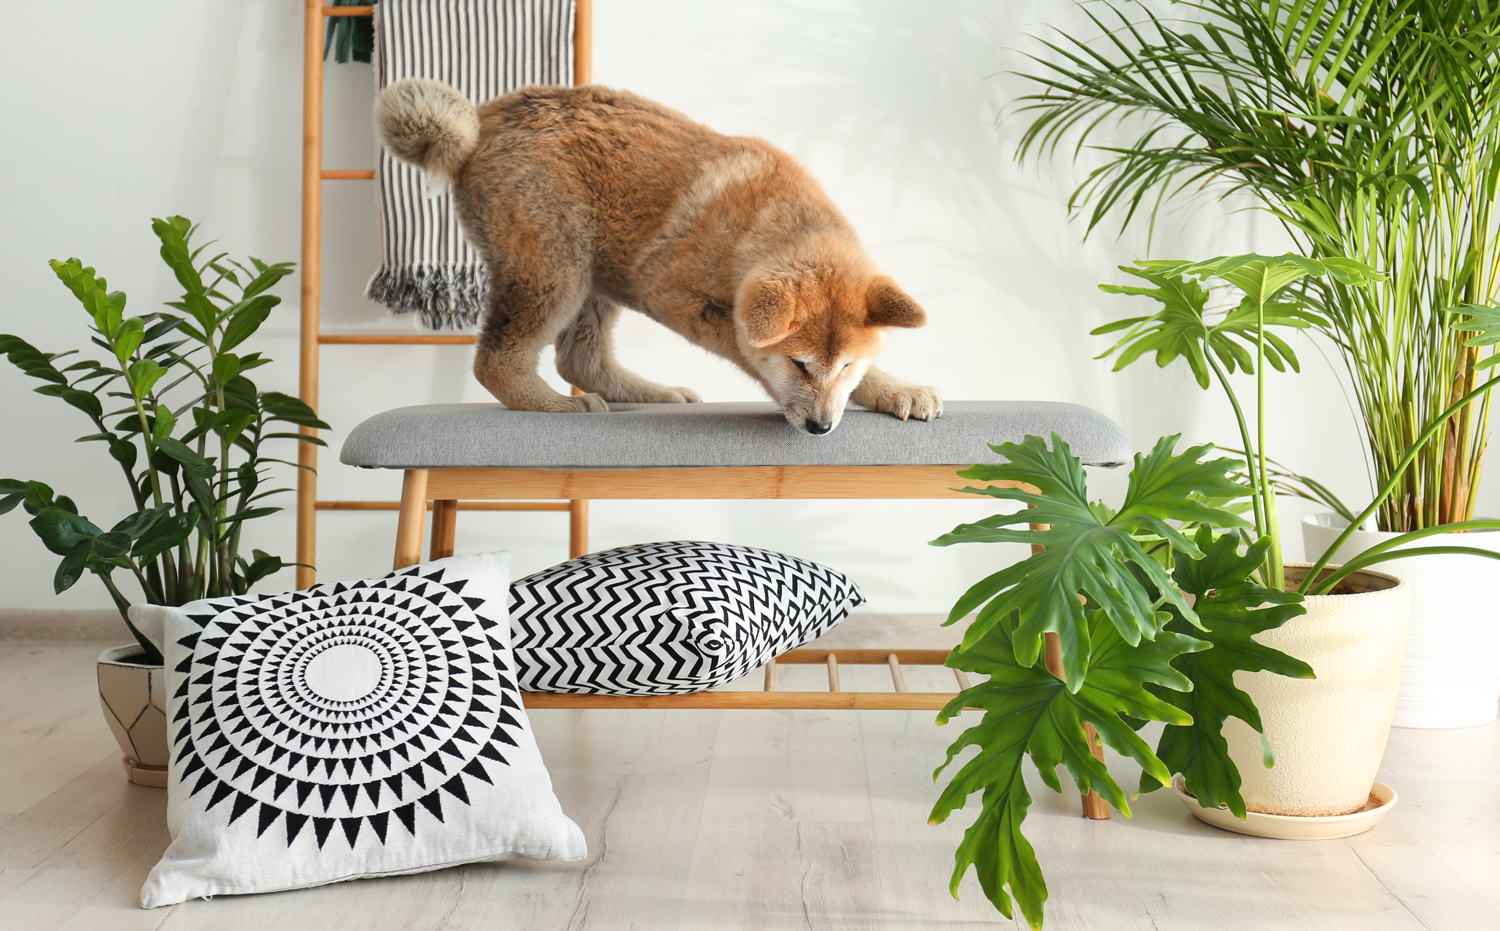 A small dog is surrounded by houseplants as he stands on a cushioned bench looking at the floor.